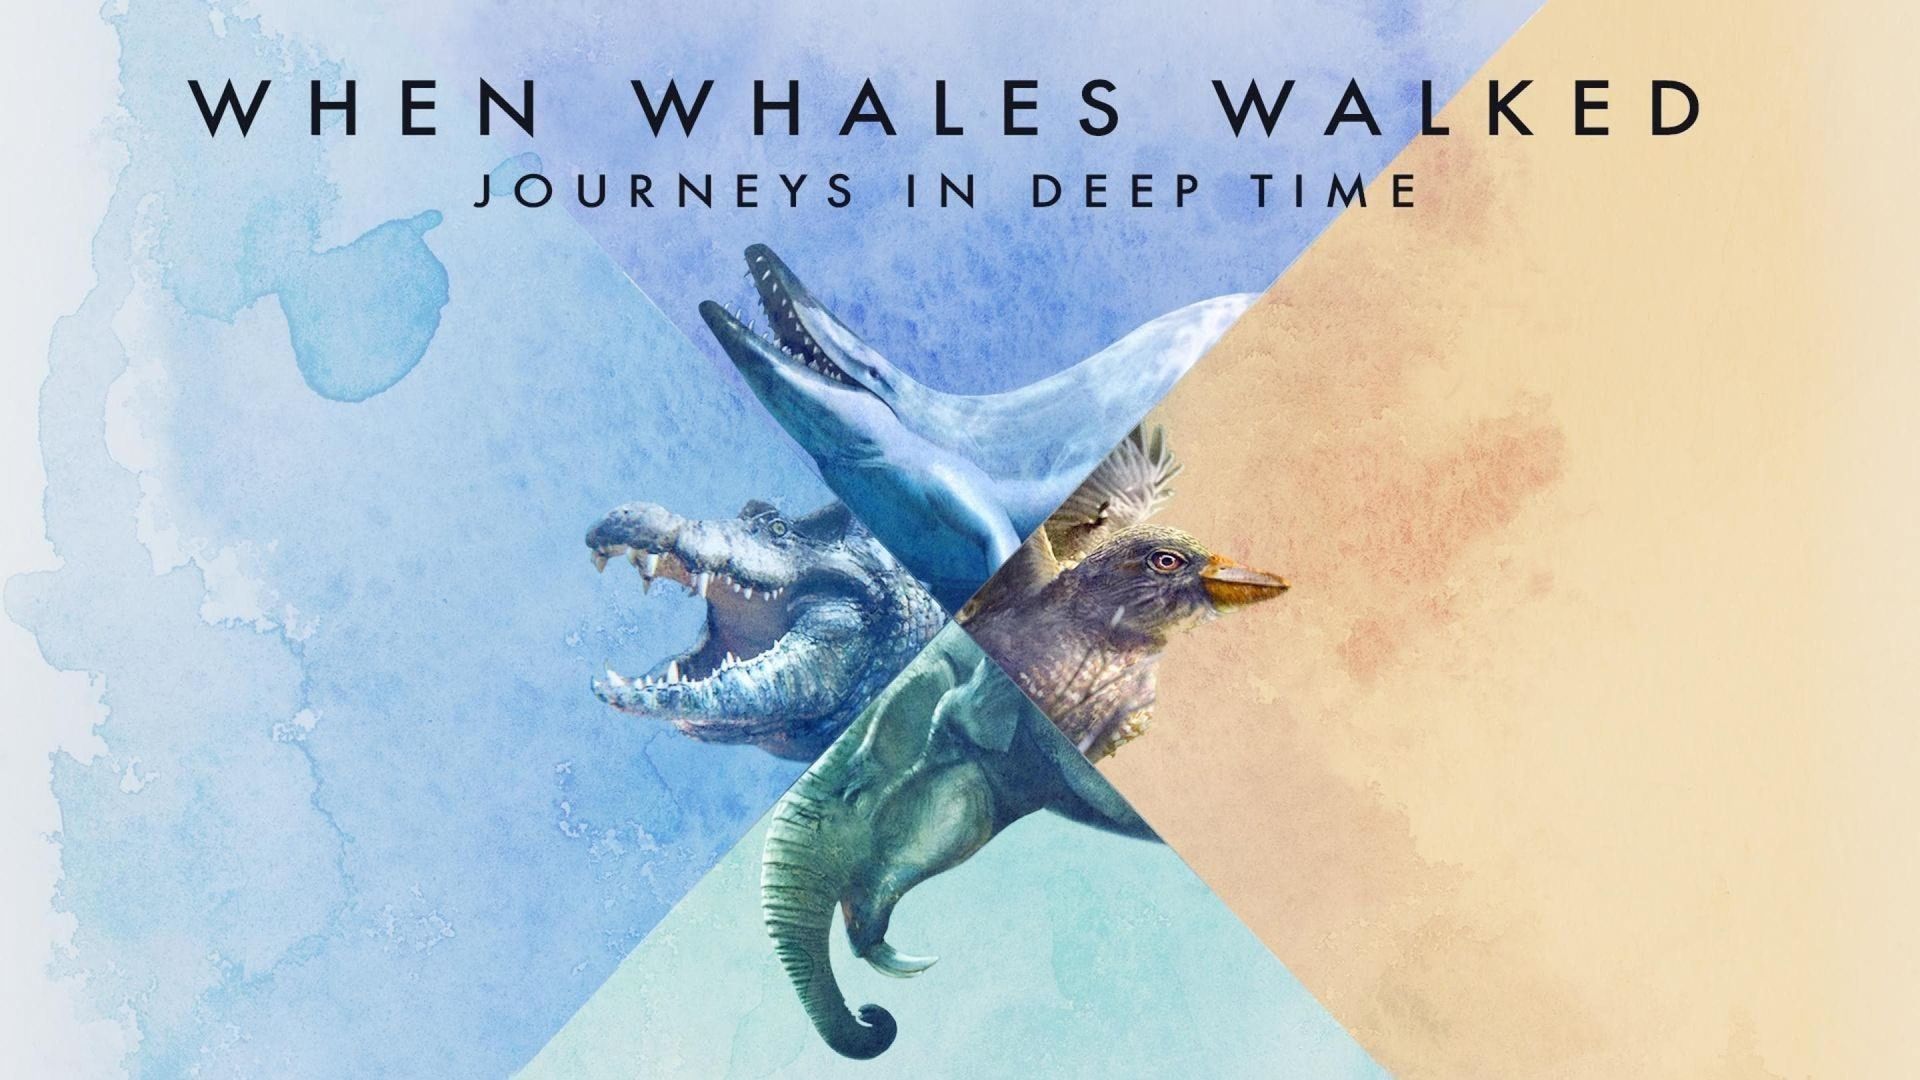 When Whales Walked: Journeys in Deep Time background